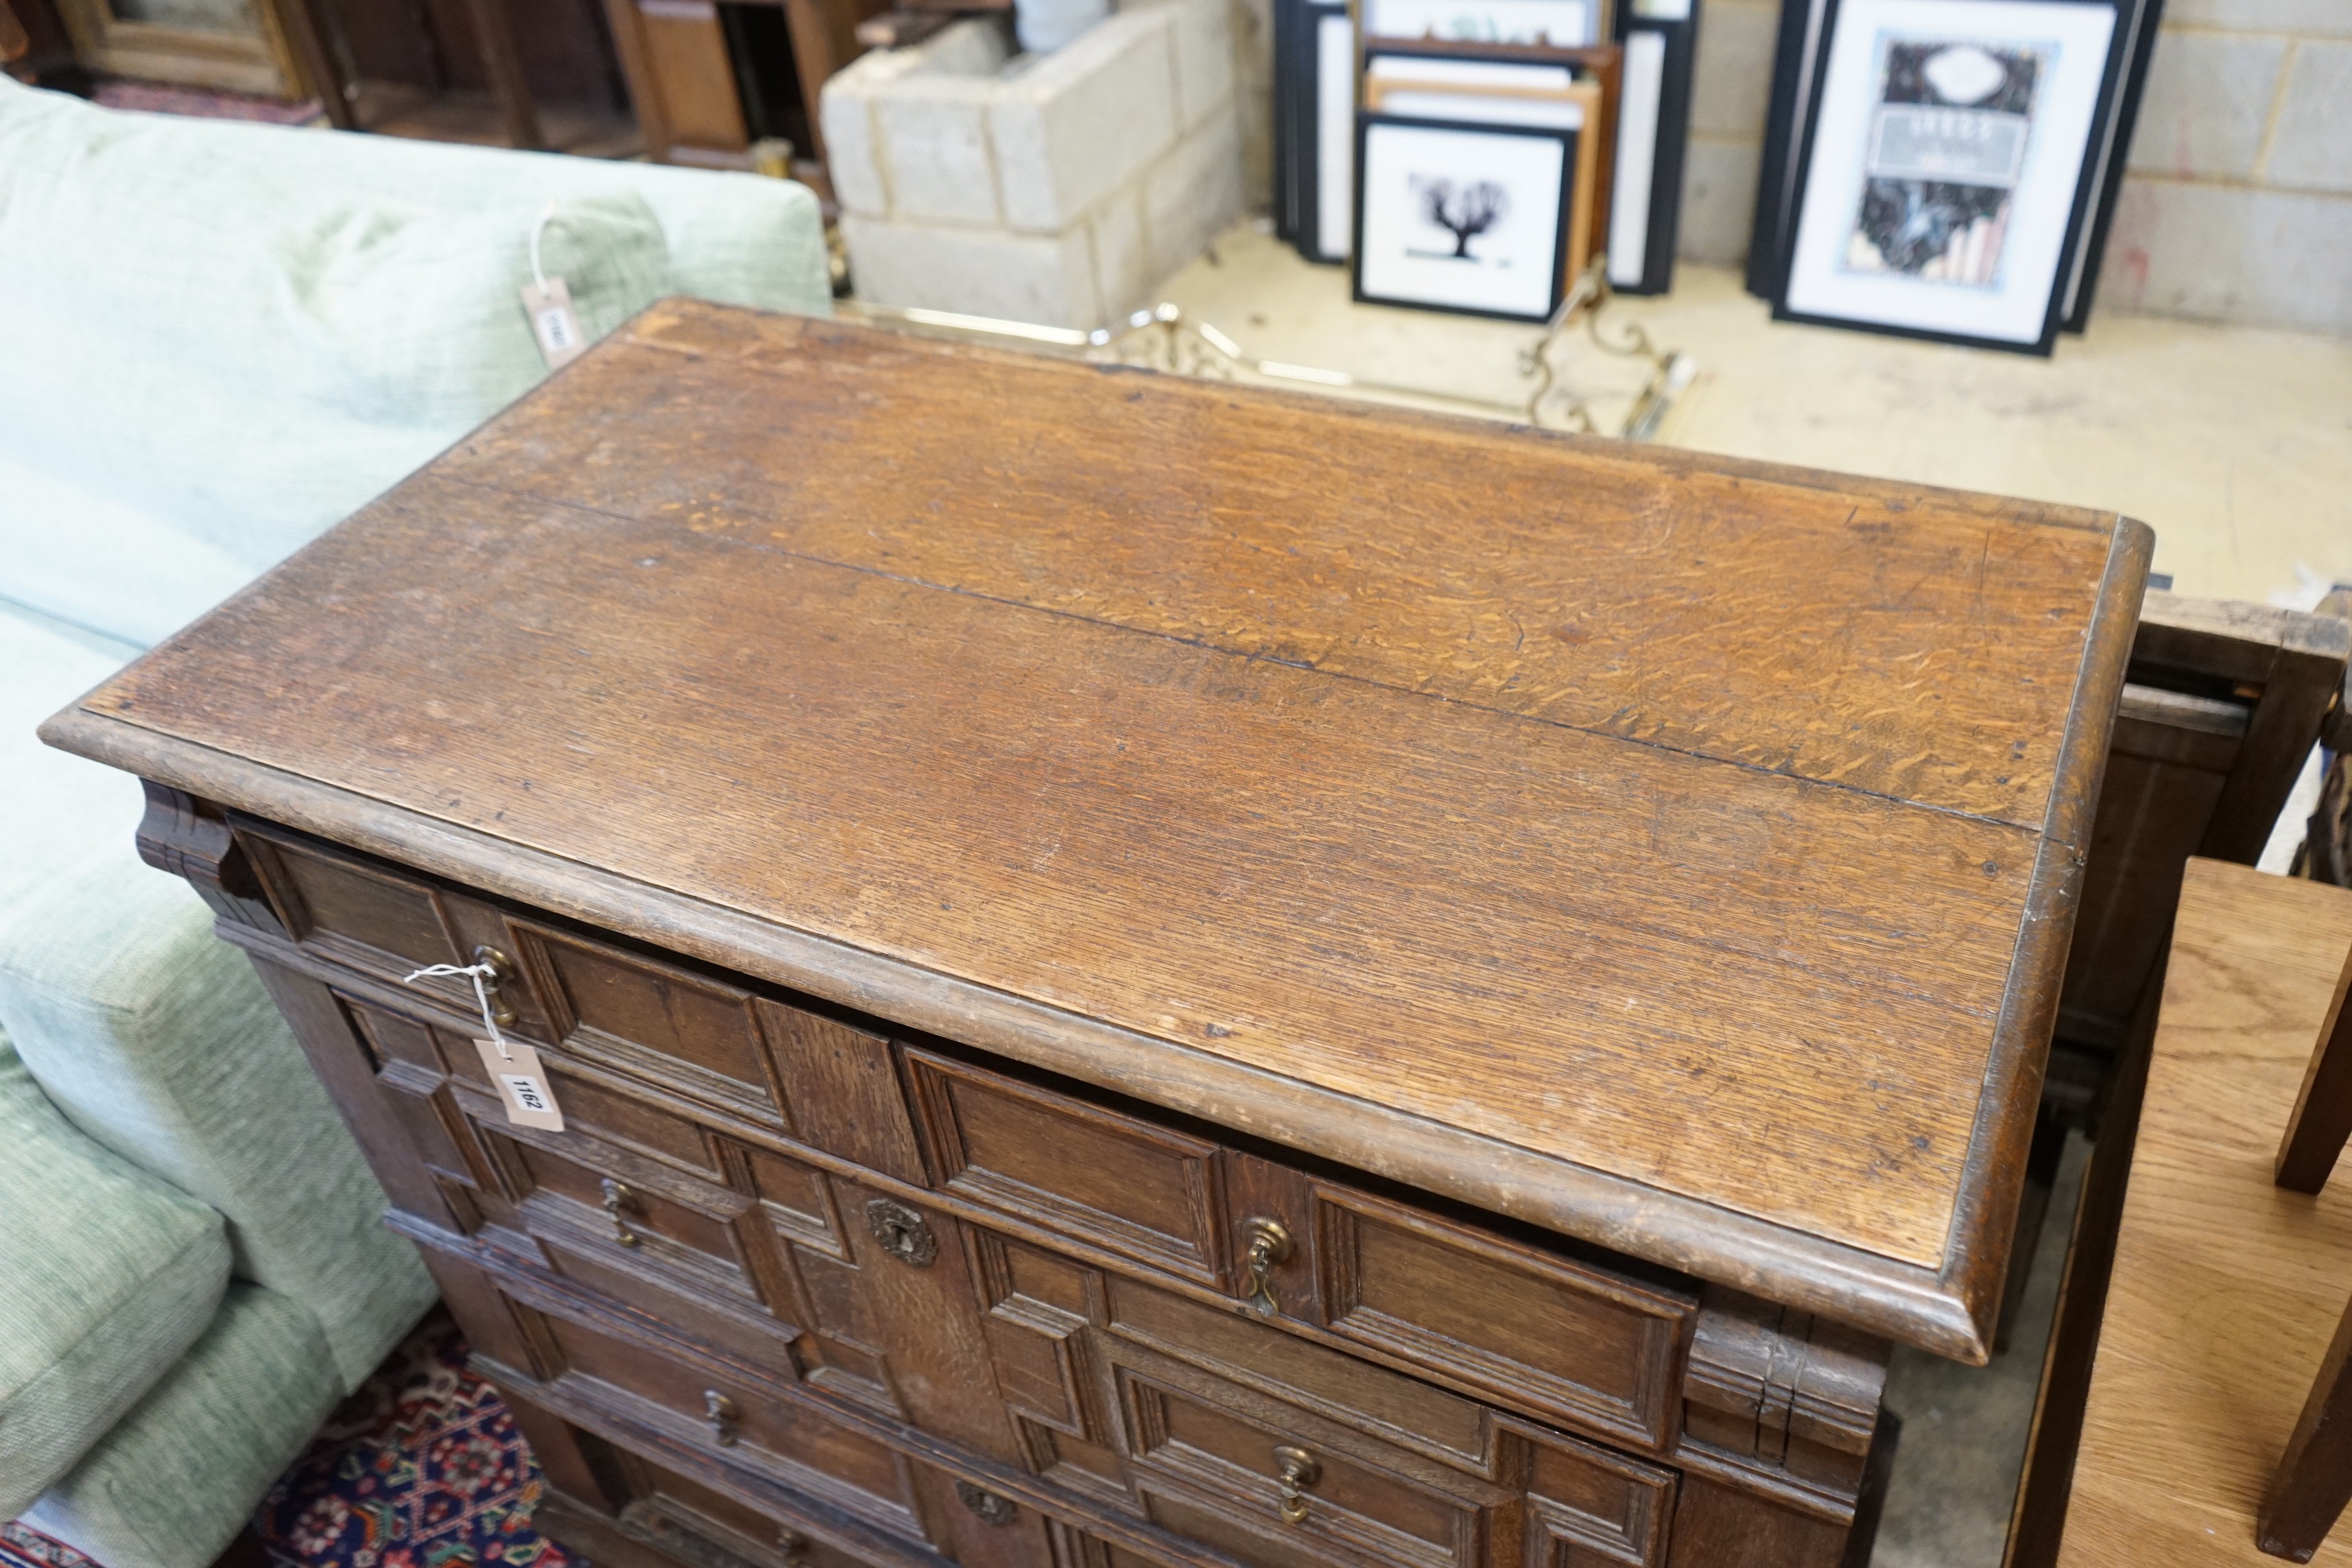 A late 17th /early 18th century oak chest, width 99cm, depth 54cm, height 95cm